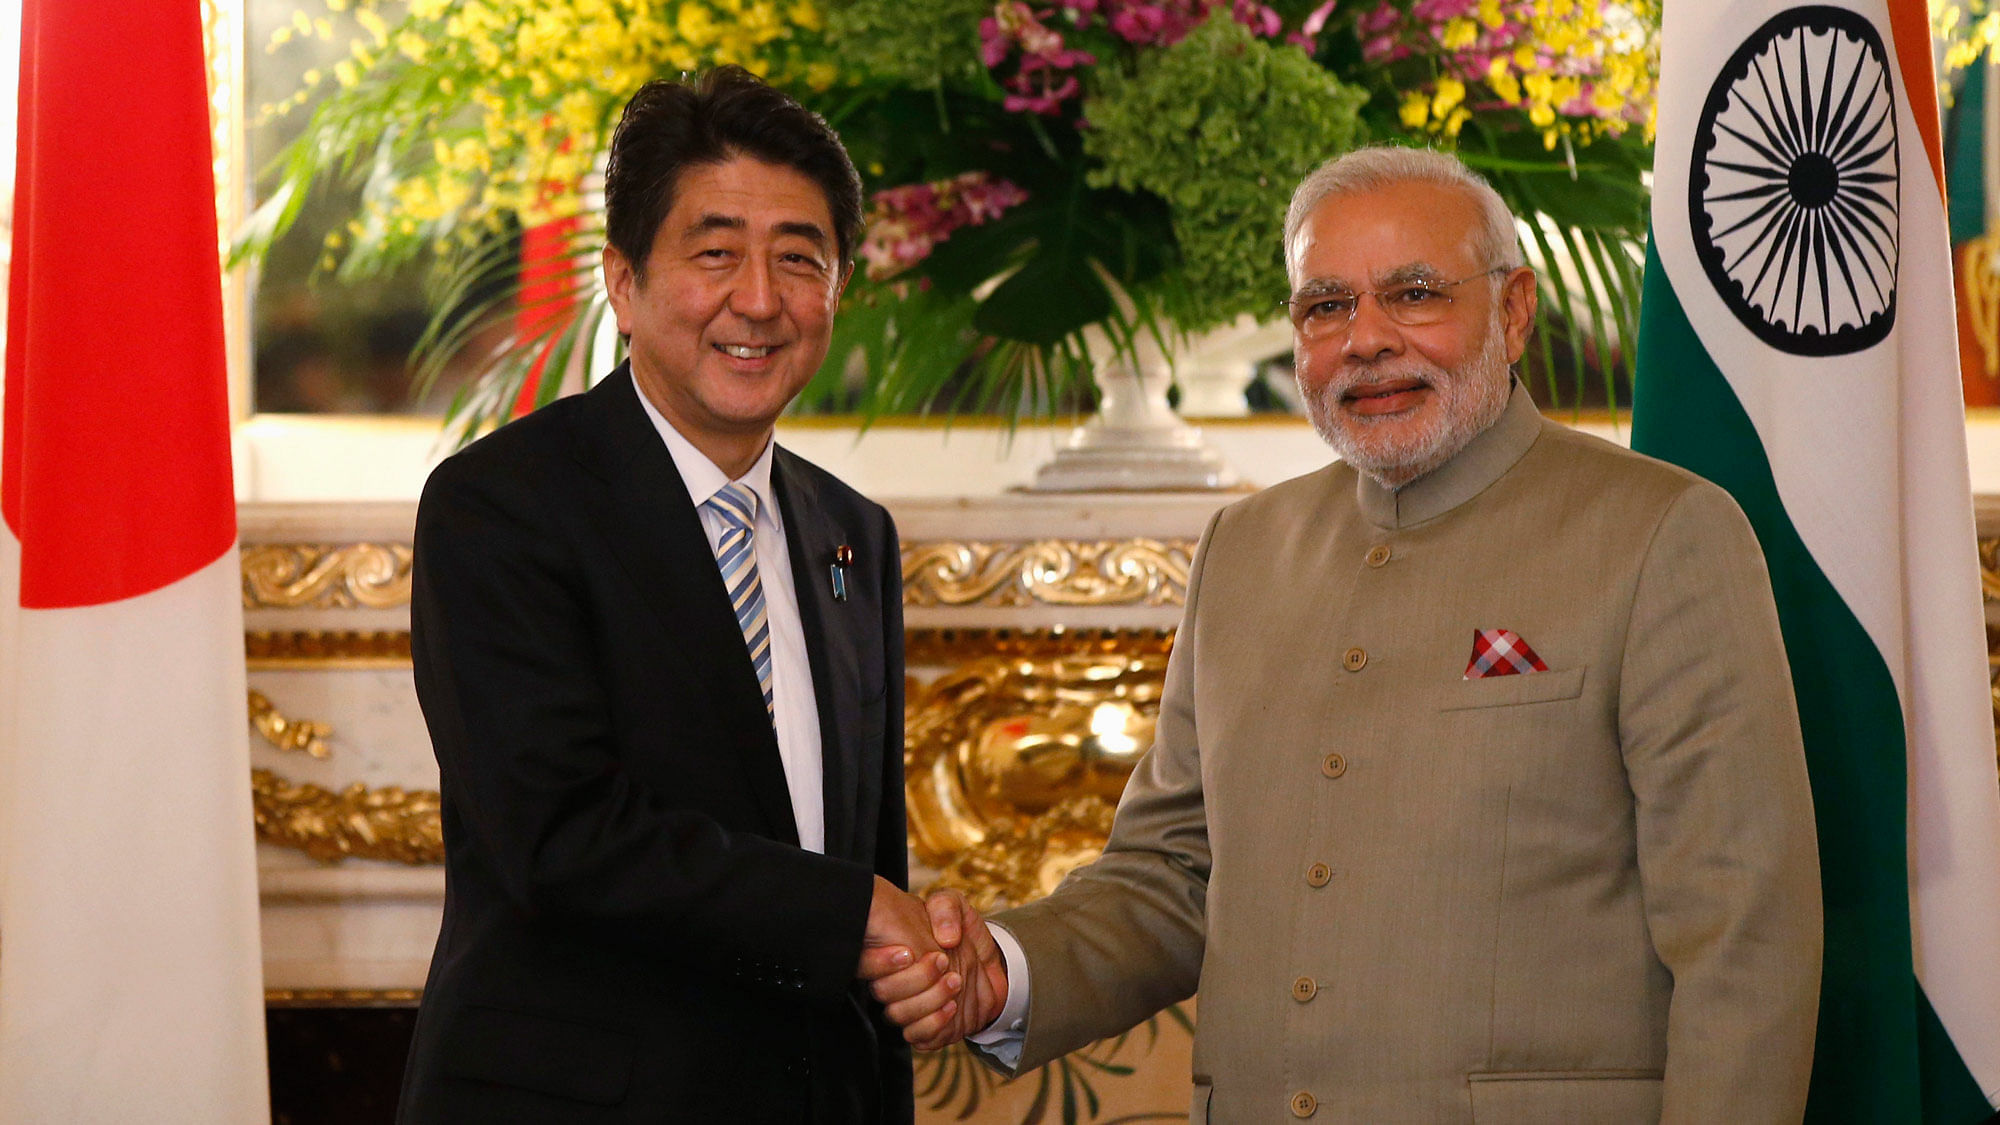  Prime Minister of Japan Shinzo Abe and Prime Minister Modi shake hands at the Tokyo Summit in 2014. (Photo: Reuters)